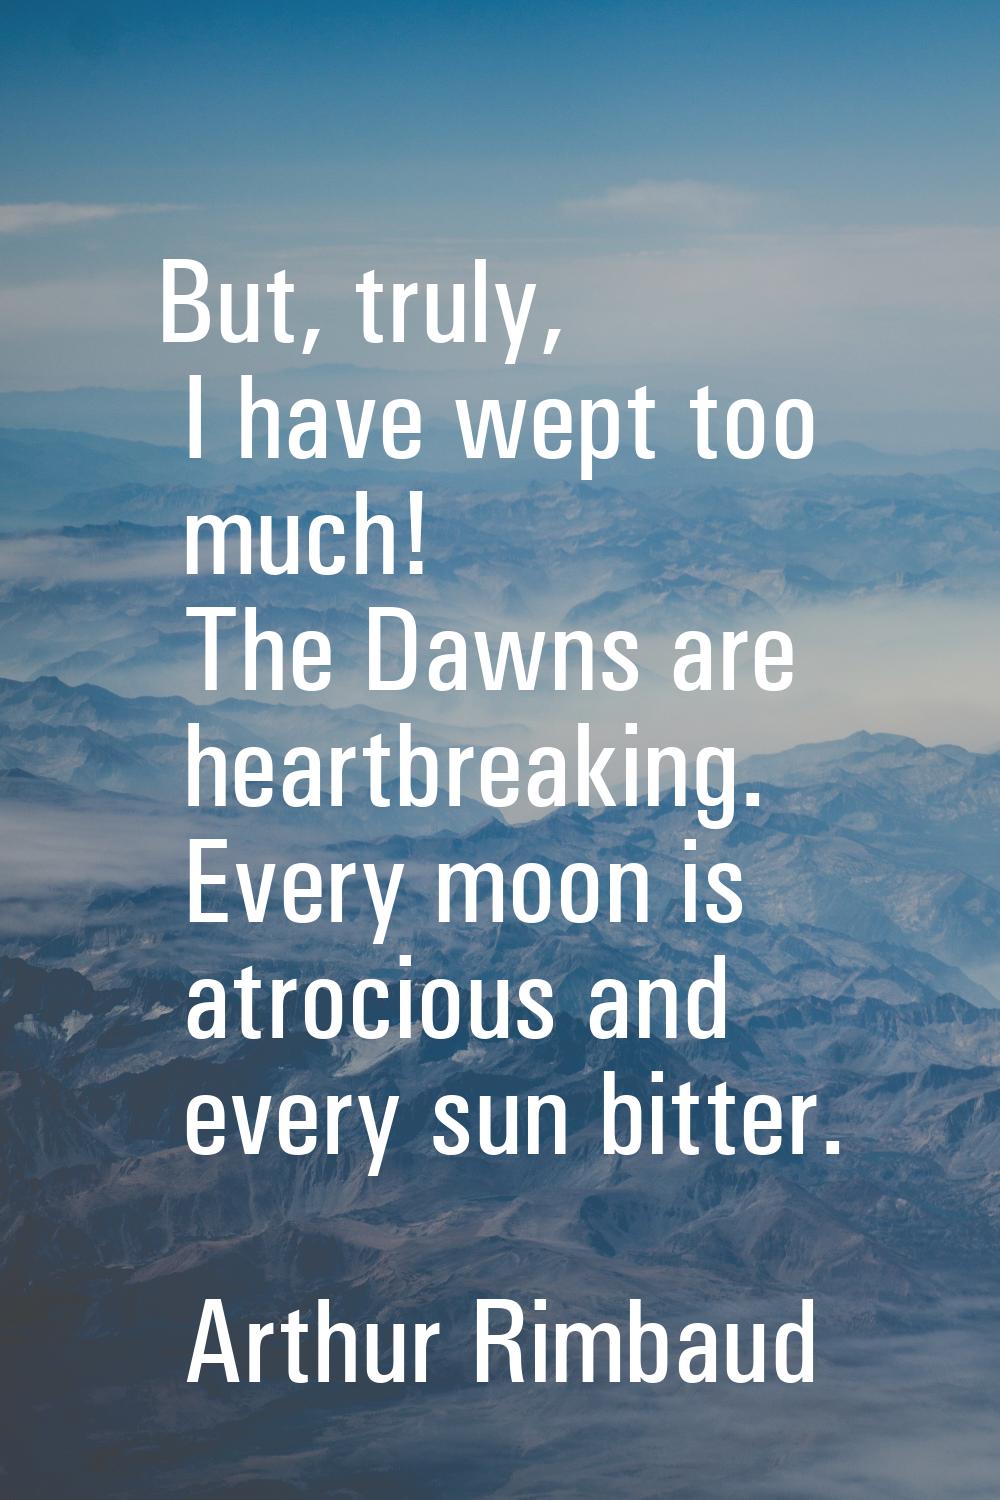 But, truly, I have wept too much! The Dawns are heartbreaking. Every moon is atrocious and every su